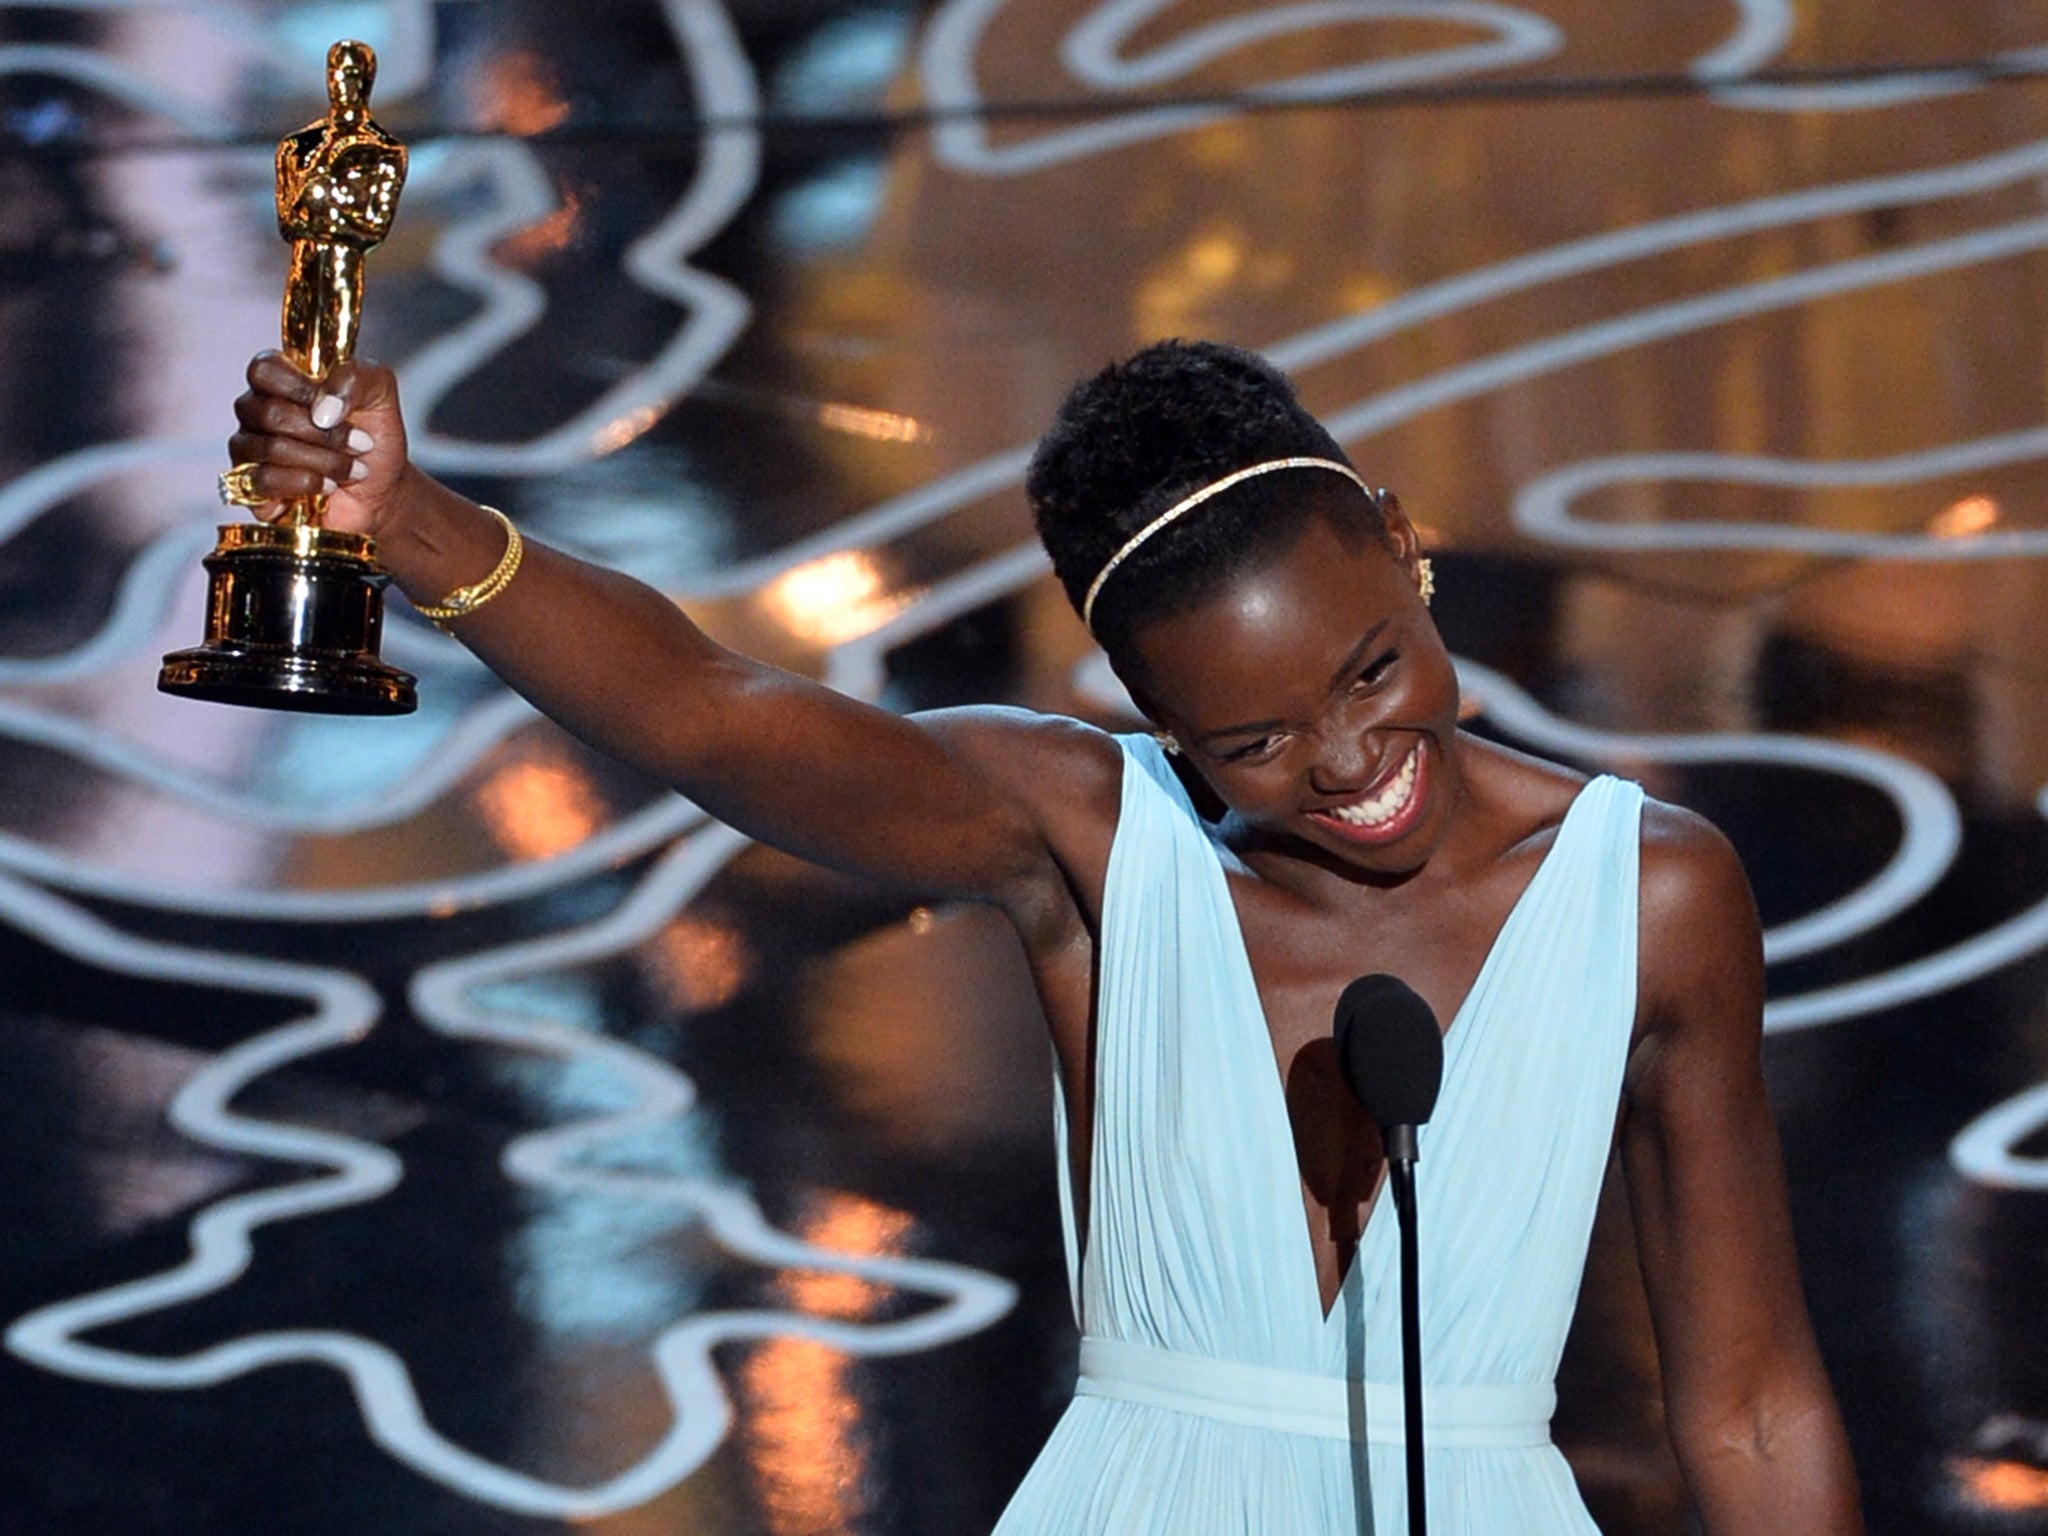 Lupita Nyong wins the Oscar for Best Performance by an Actress in a Supporting Role